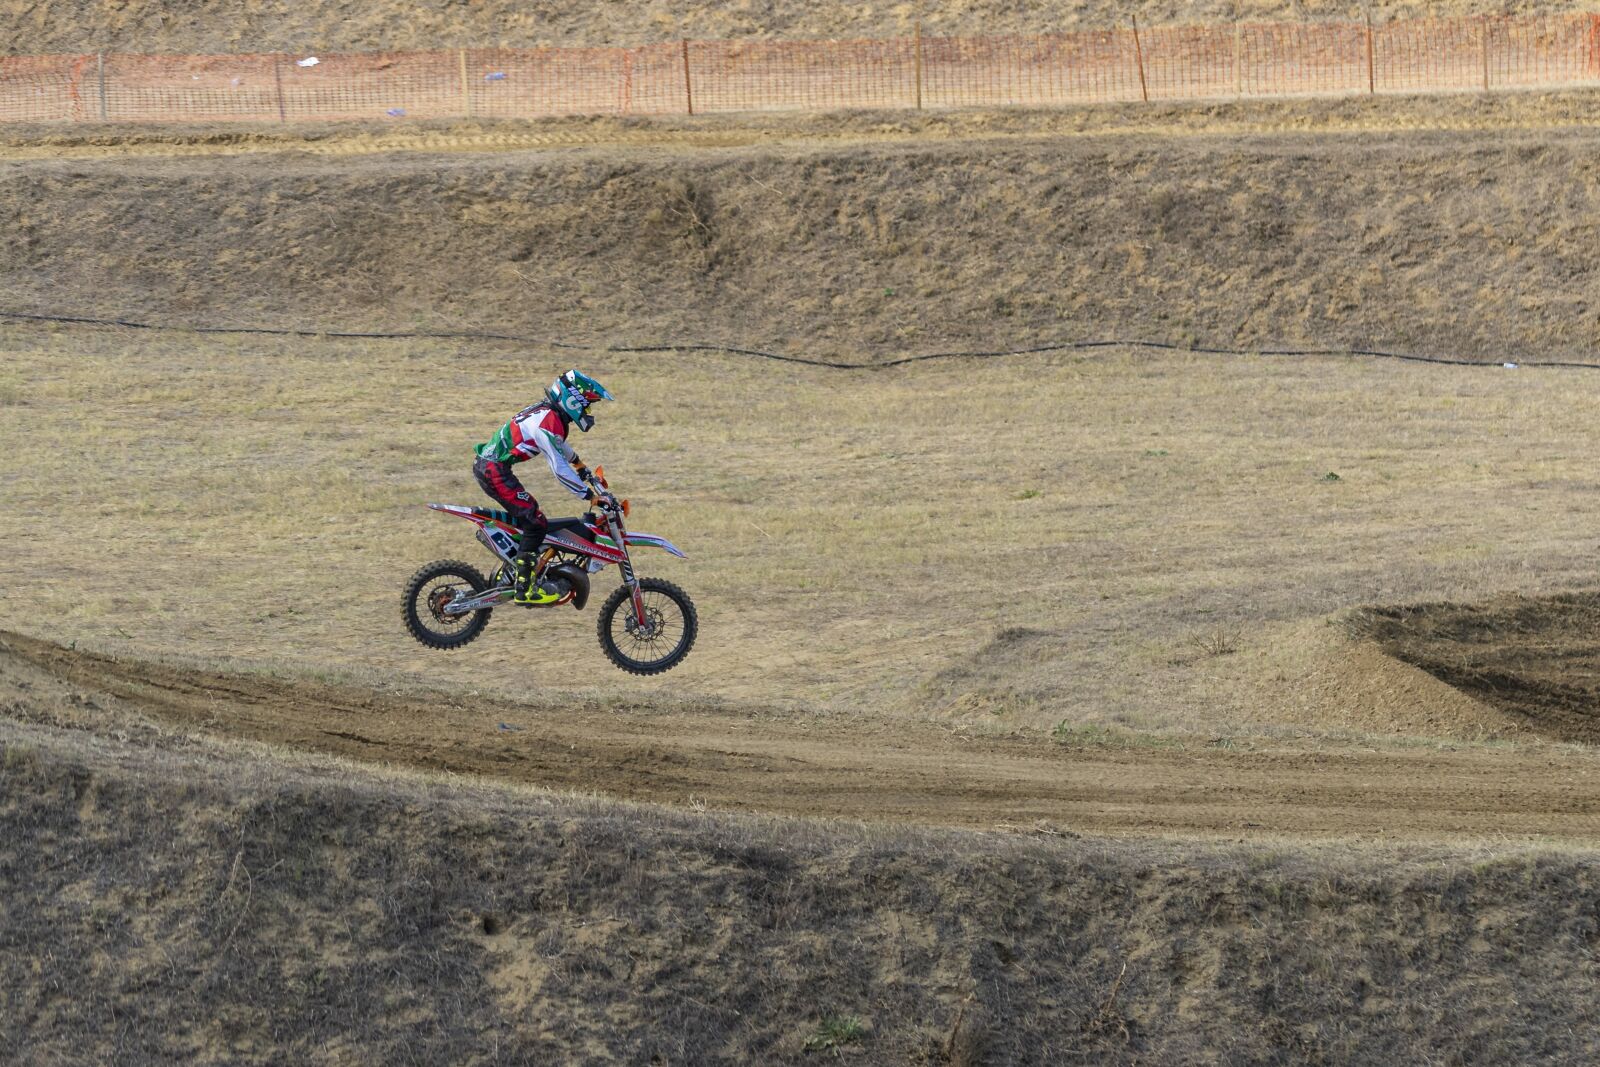 Sony a7 II + Sony FE 70-200mm F4 G OSS sample photo. Extreme, motocross, motorcycle photography